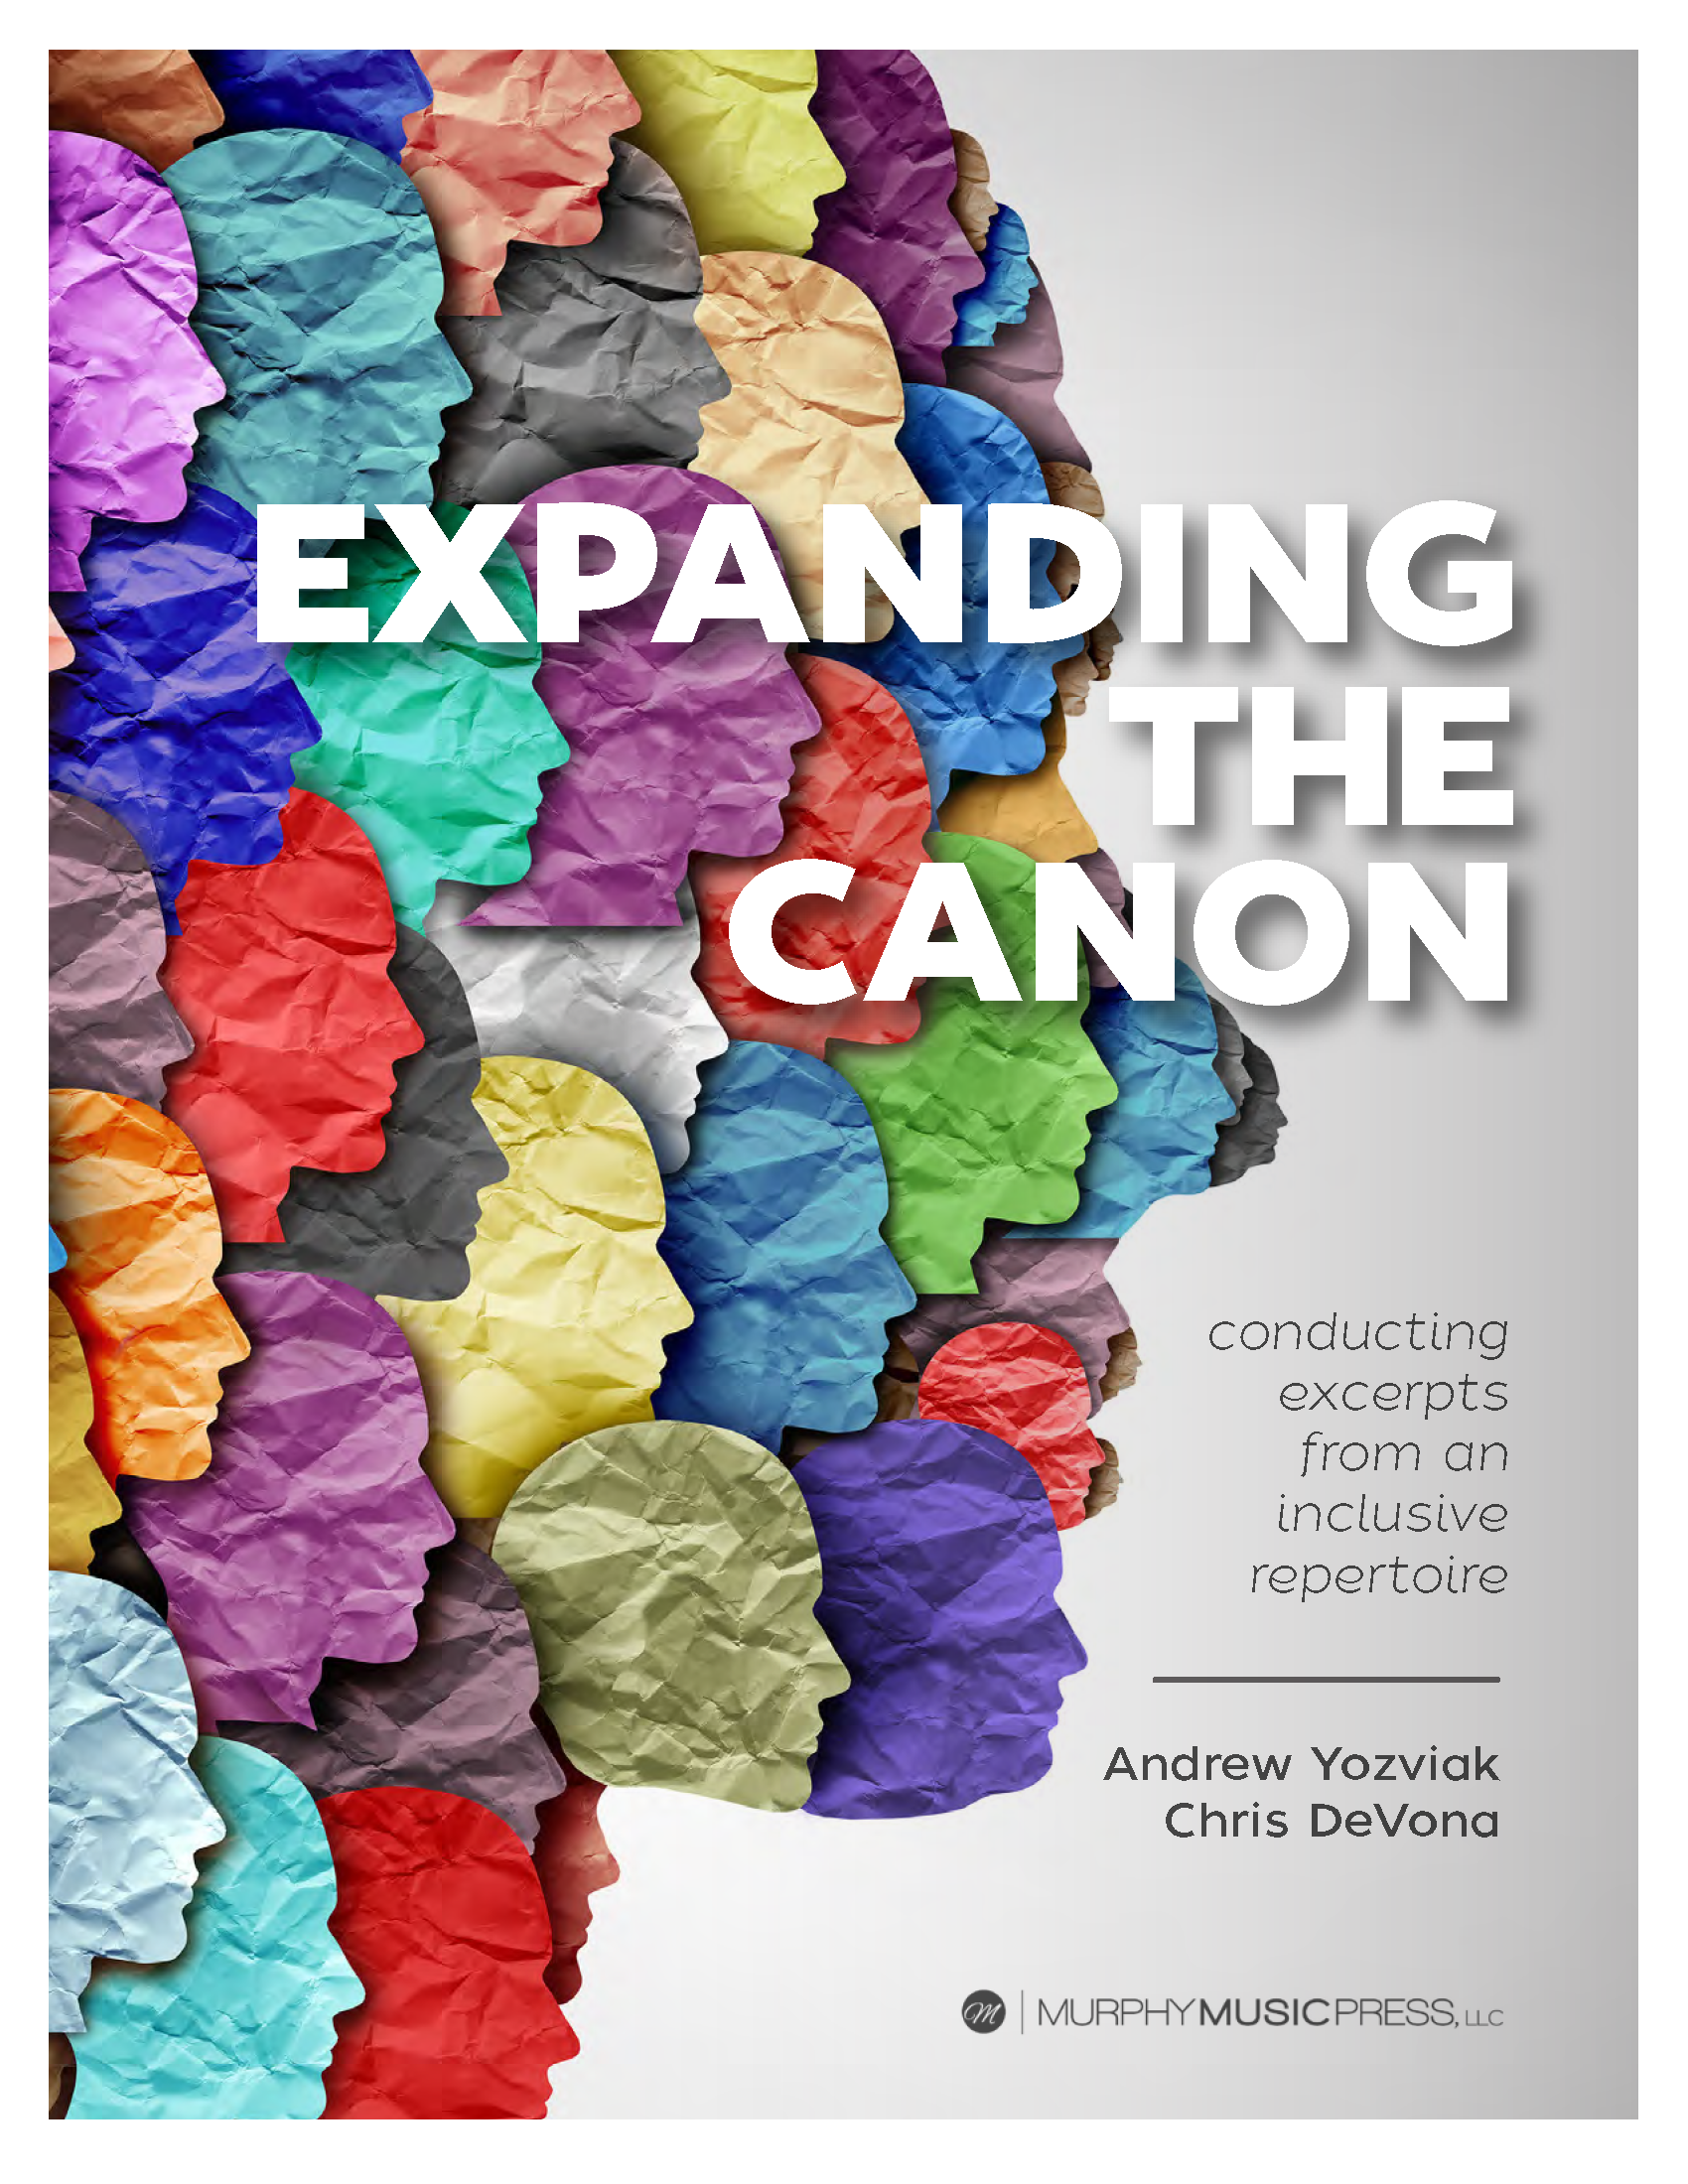 Expanding The Canon - Conducting Excerpts - Hardcopy A4 Score Book